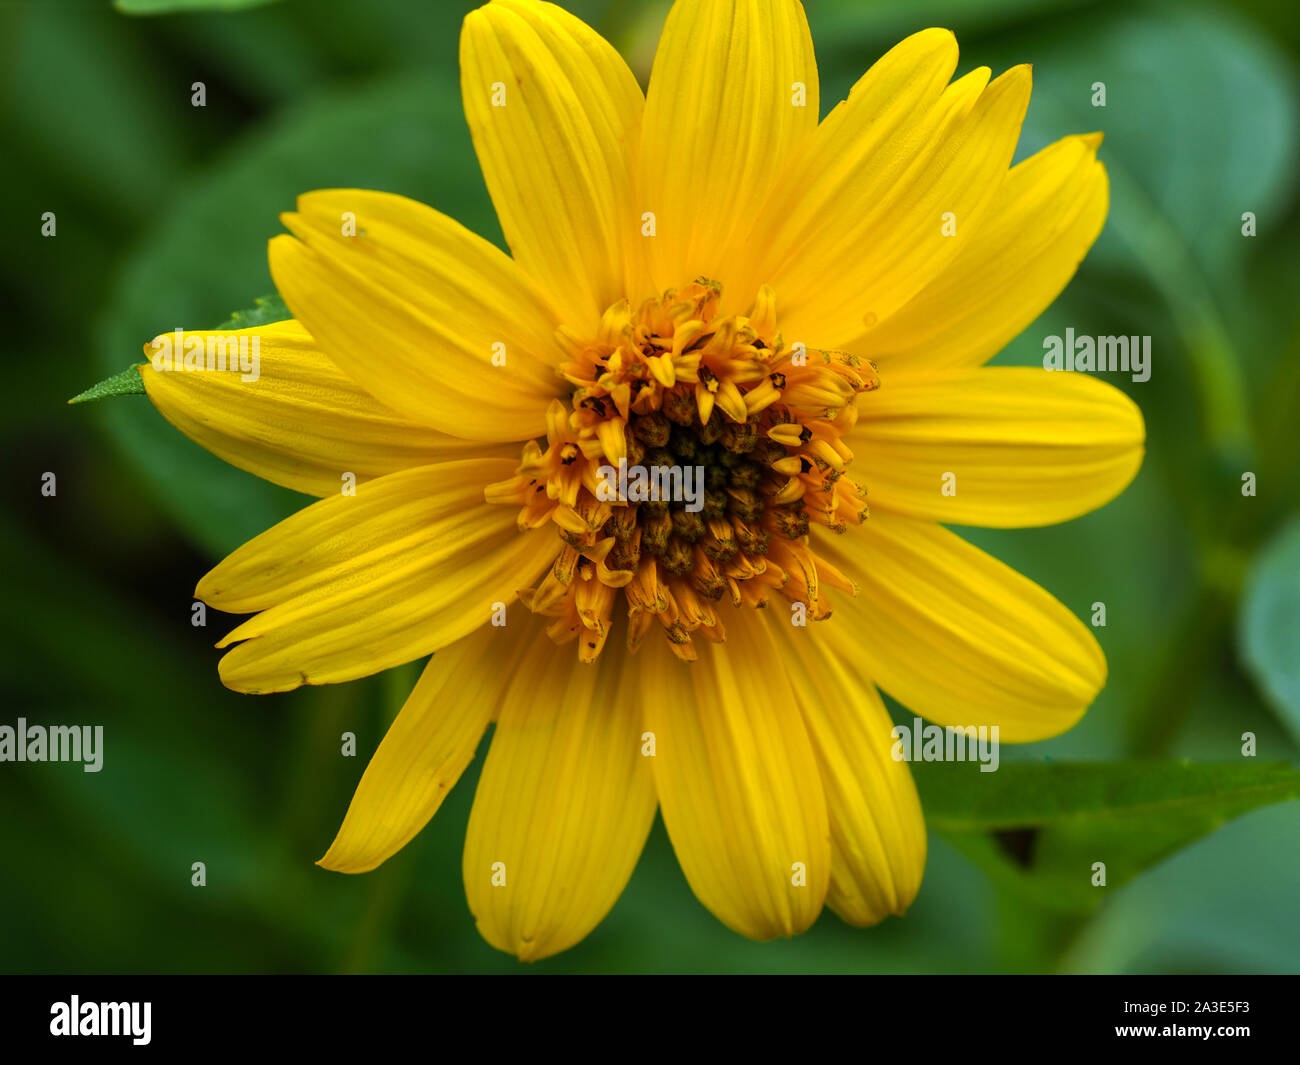 Closeup of a bright yellow Helianthus flower in a garden Stock Photo